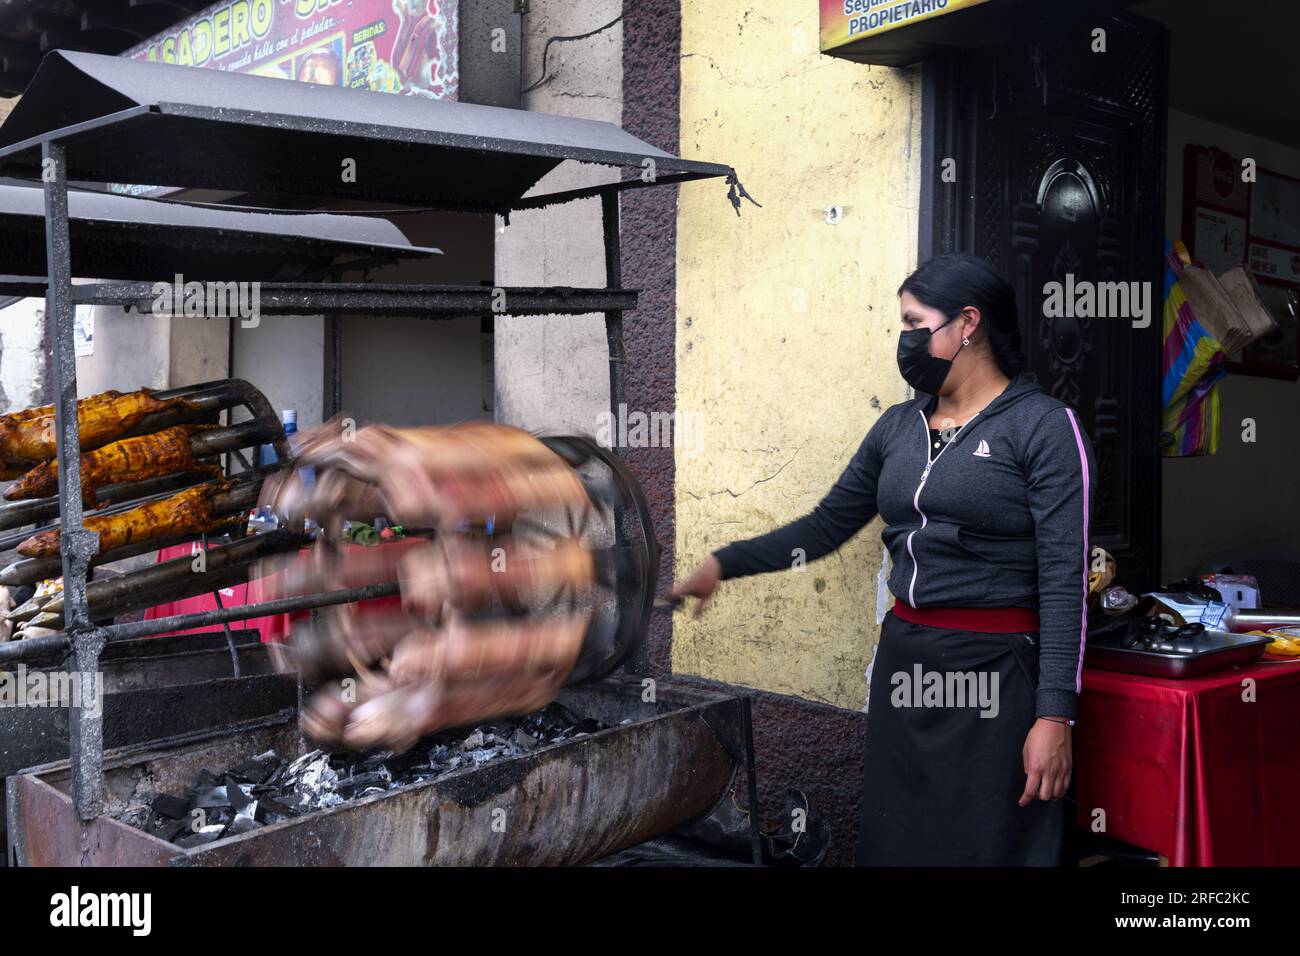 Woman prepares guinea pigs on a barbecue carousel Stock Photo